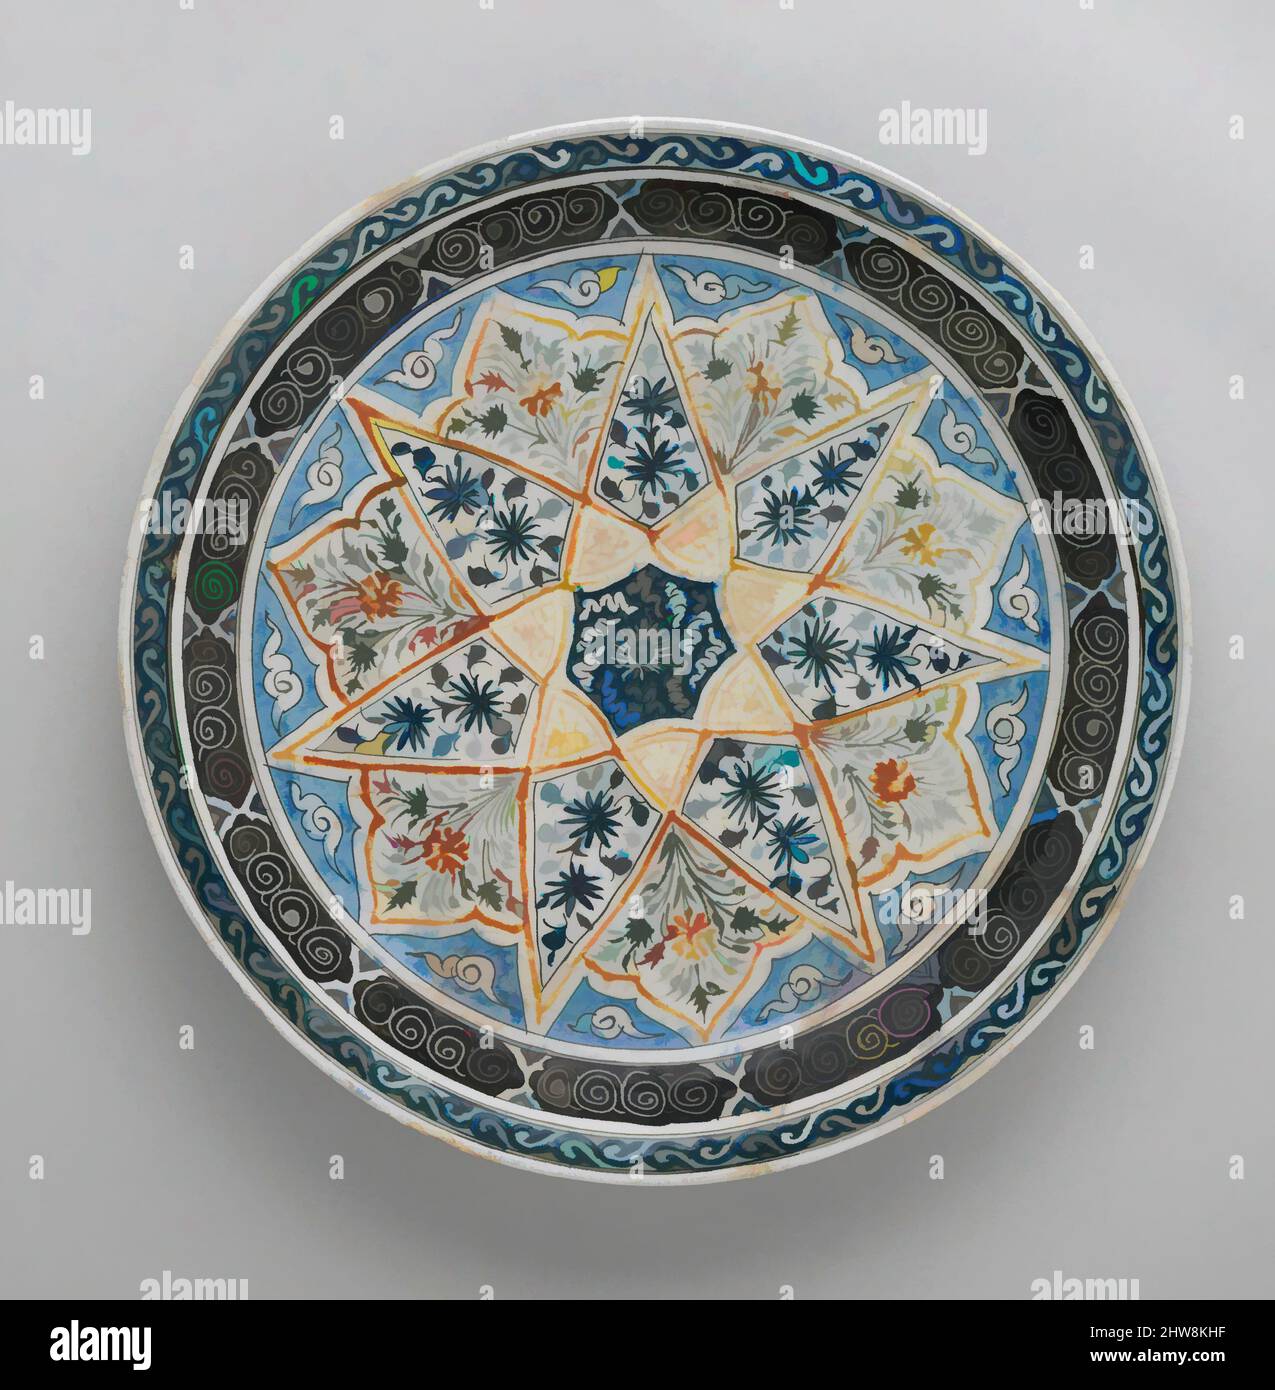 Art inspired by Plate with Vegetal Decoration in a Seven-pointed Star, 17th century, Attributed to Kirman. Made in Iran, Stonepaste; polychrome painted under transparent glaze, H. 2 1/2 in. (6.4 cm), Ceramics, Classic works modernized by Artotop with a splash of modernity. Shapes, color and value, eye-catching visual impact on art. Emotions through freedom of artworks in a contemporary way. A timeless message pursuing a wildly creative new direction. Artists turning to the digital medium and creating the Artotop NFT Stock Photo